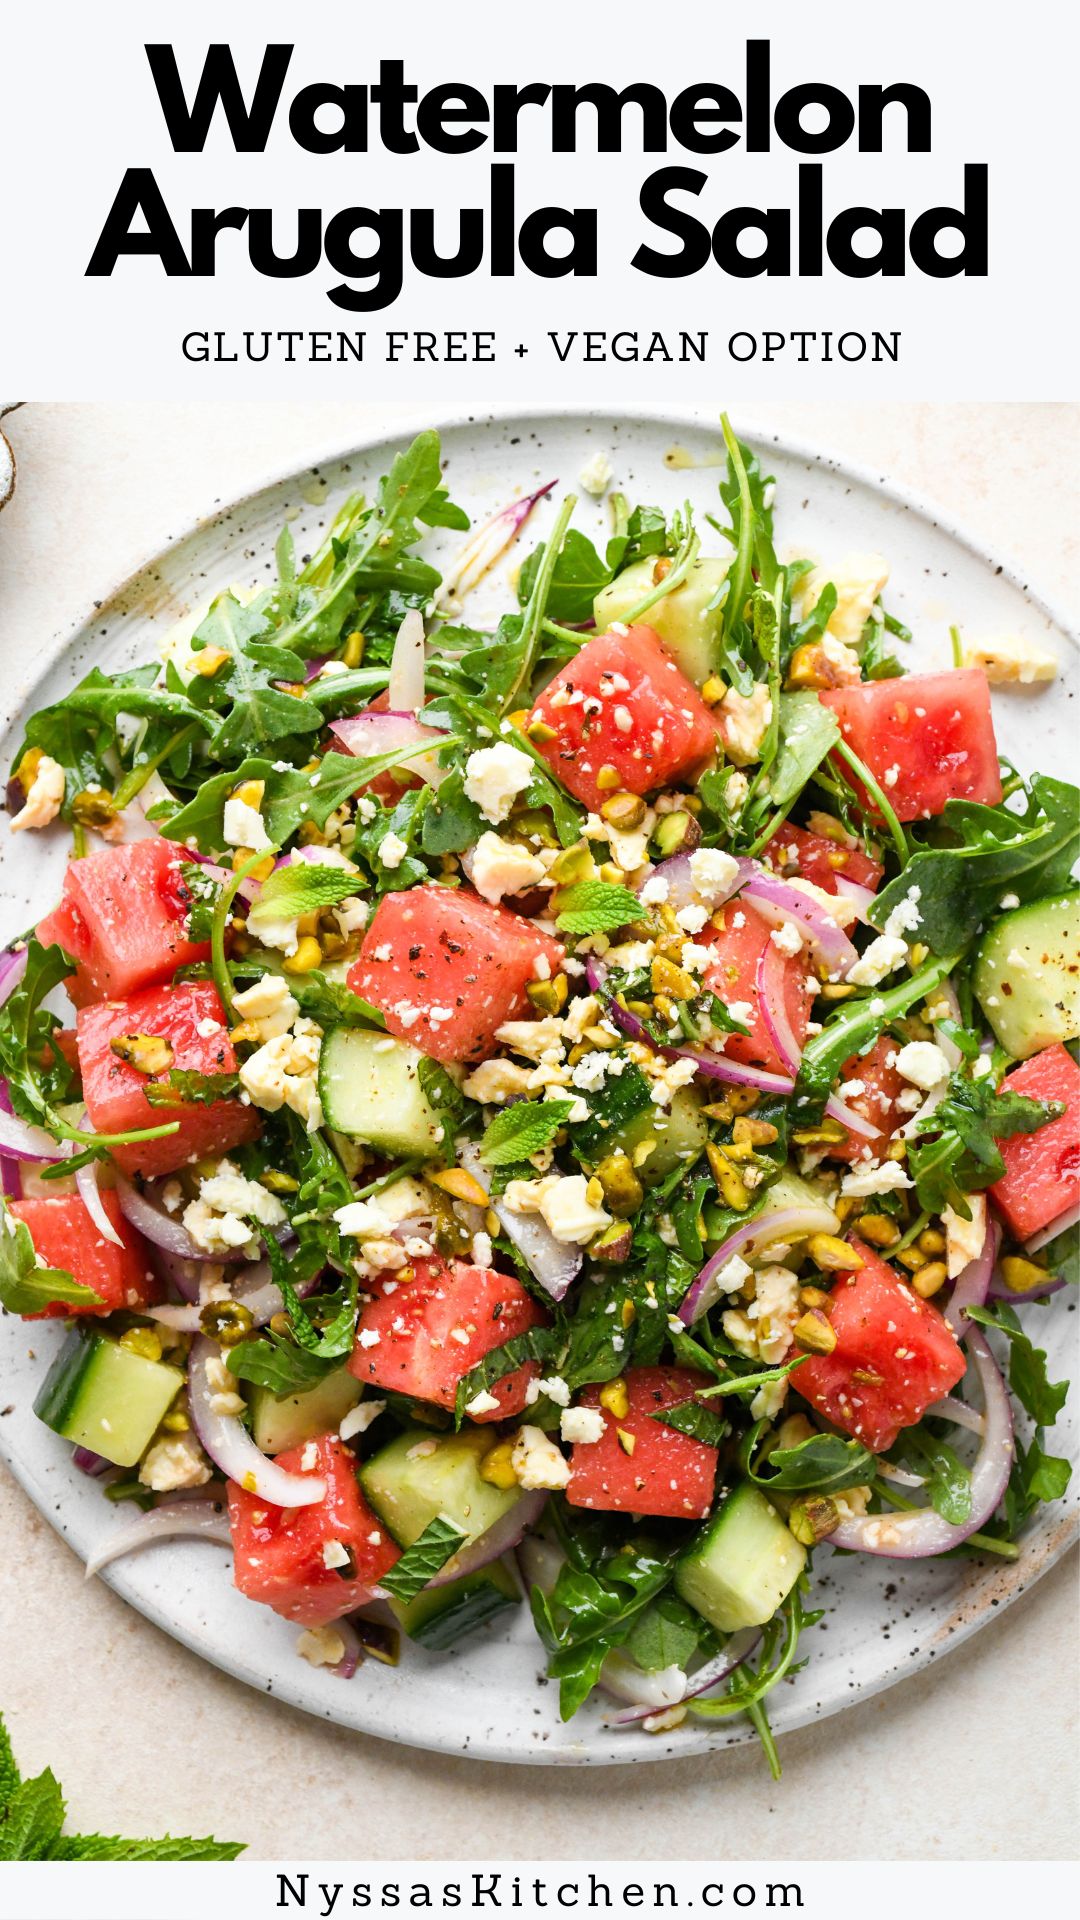 This watermelon arugula is a delightfully refreshing summer salad! Made with ripe and sweet watermelon chunks, diced cucumber, peppery arugula, briny feta cheese, fresh mint leaves, and chopped pistachios for crunch. The best salad to bring to cookouts, picnics, or family dinner. Gluten free, vegetarian, vegan option, paleo option, Whole30 option.